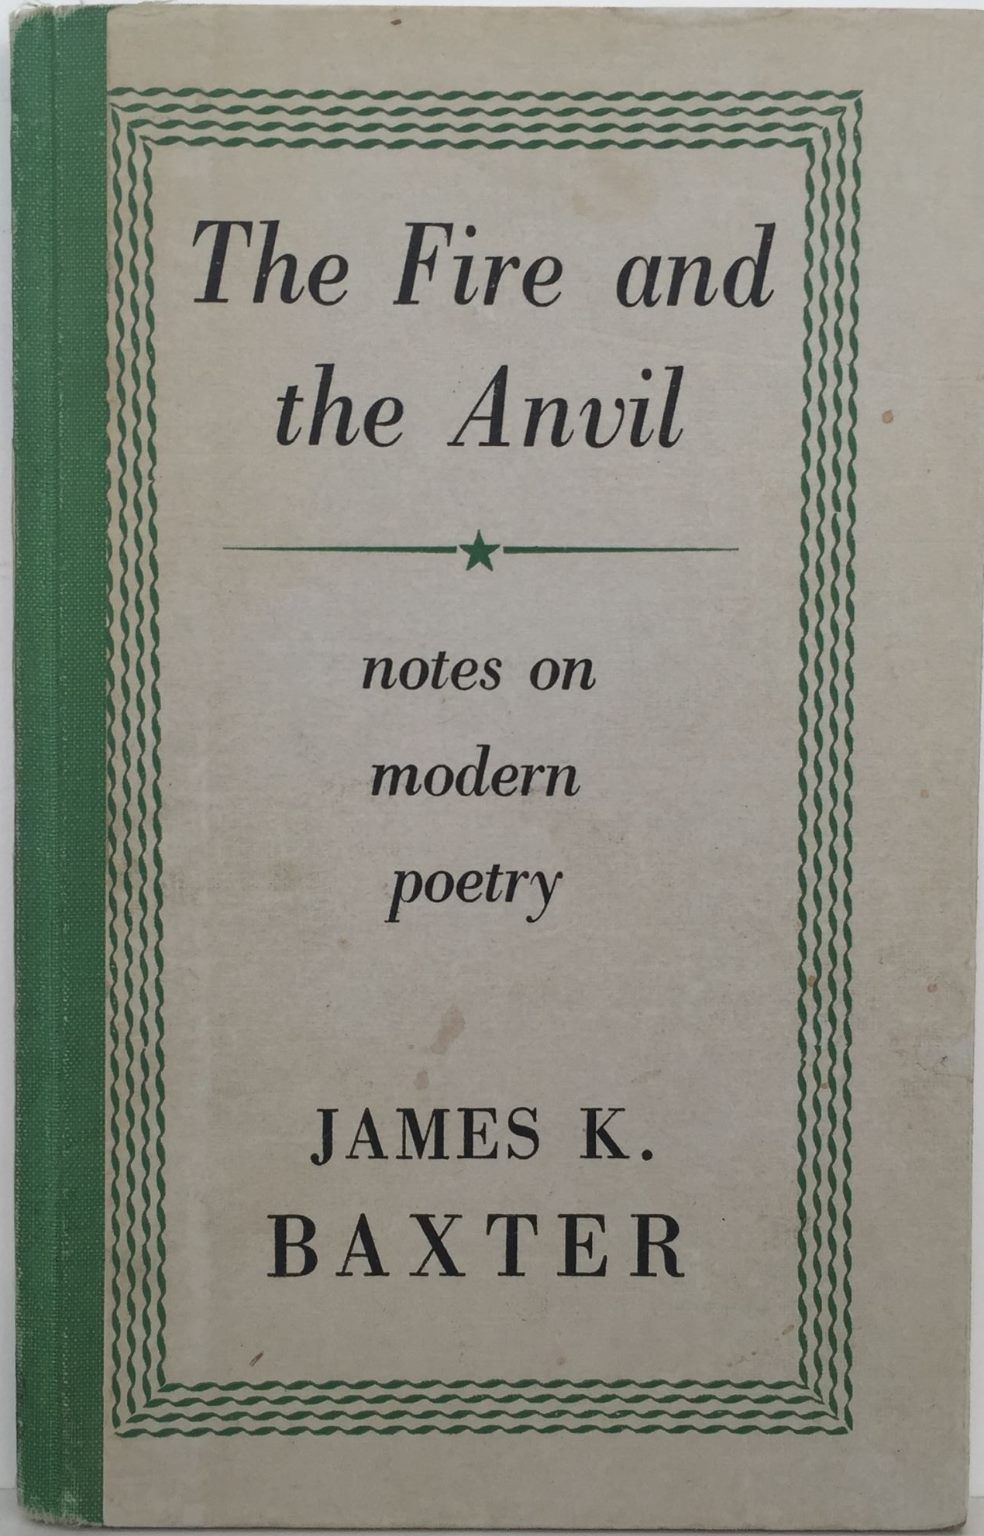 THE FIRE AND THE ANVIL: Notes on Modern Poetry by James K Baxter